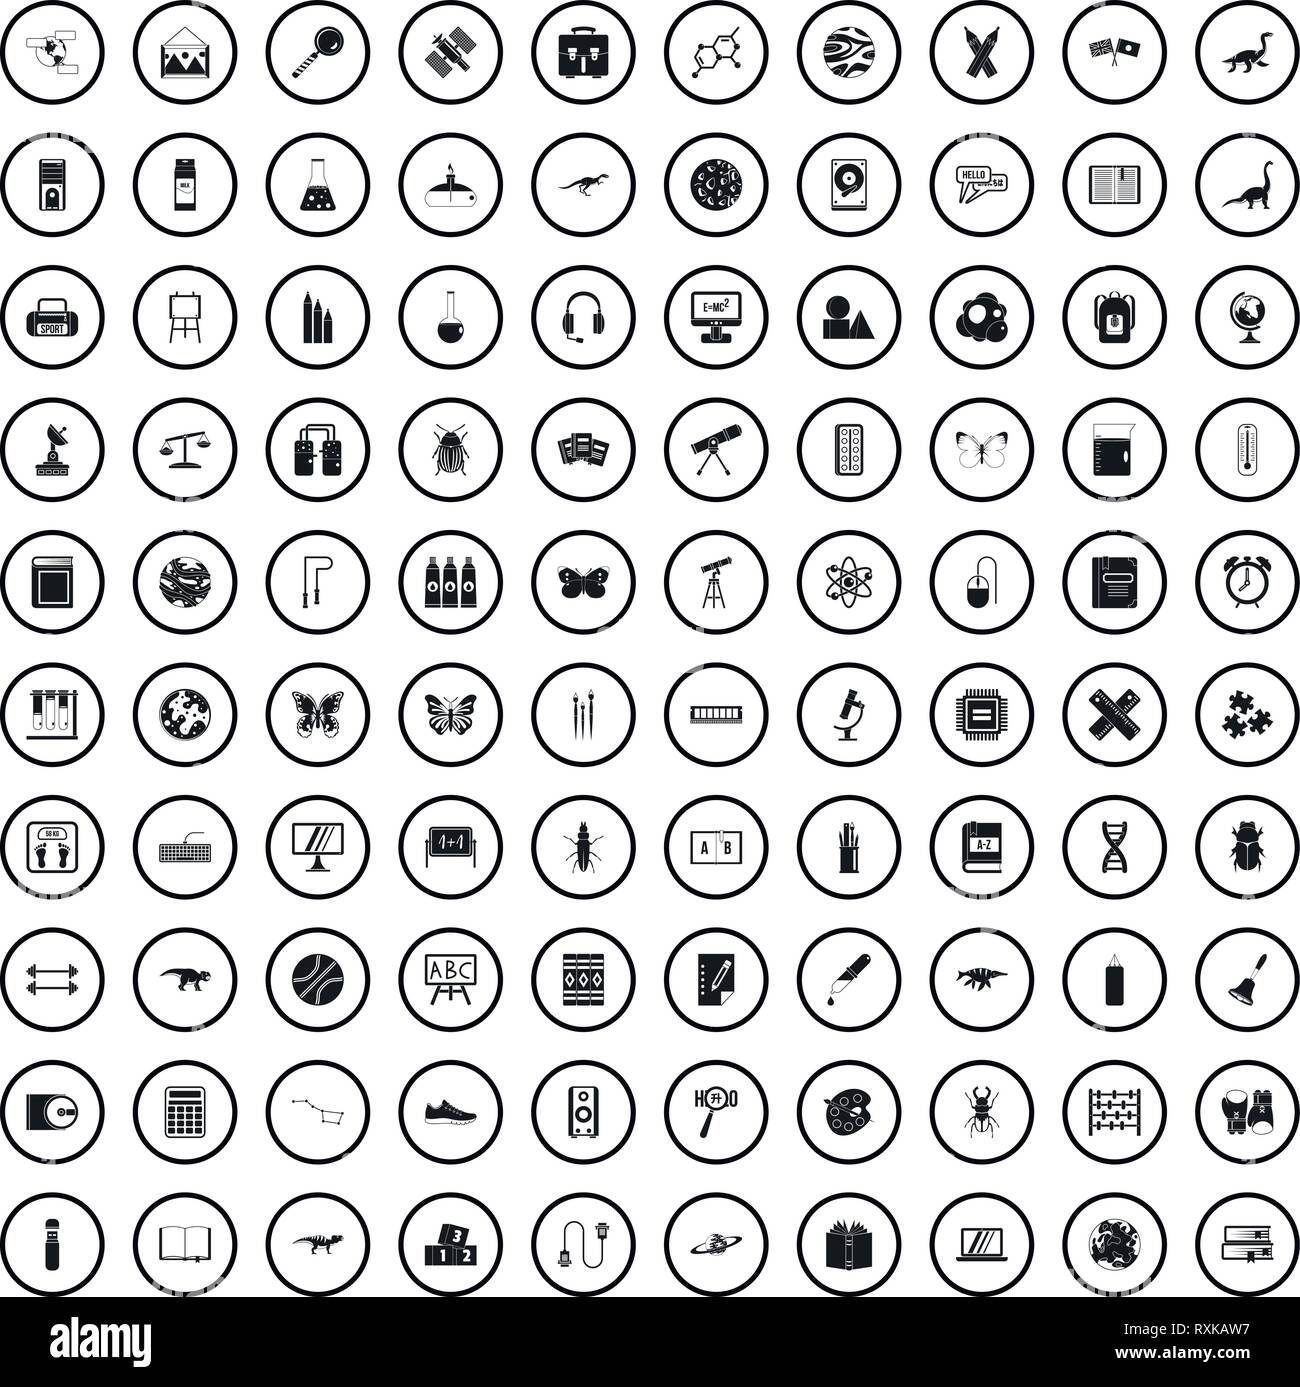 100 teaching materials icons set, simple style  Stock Vector